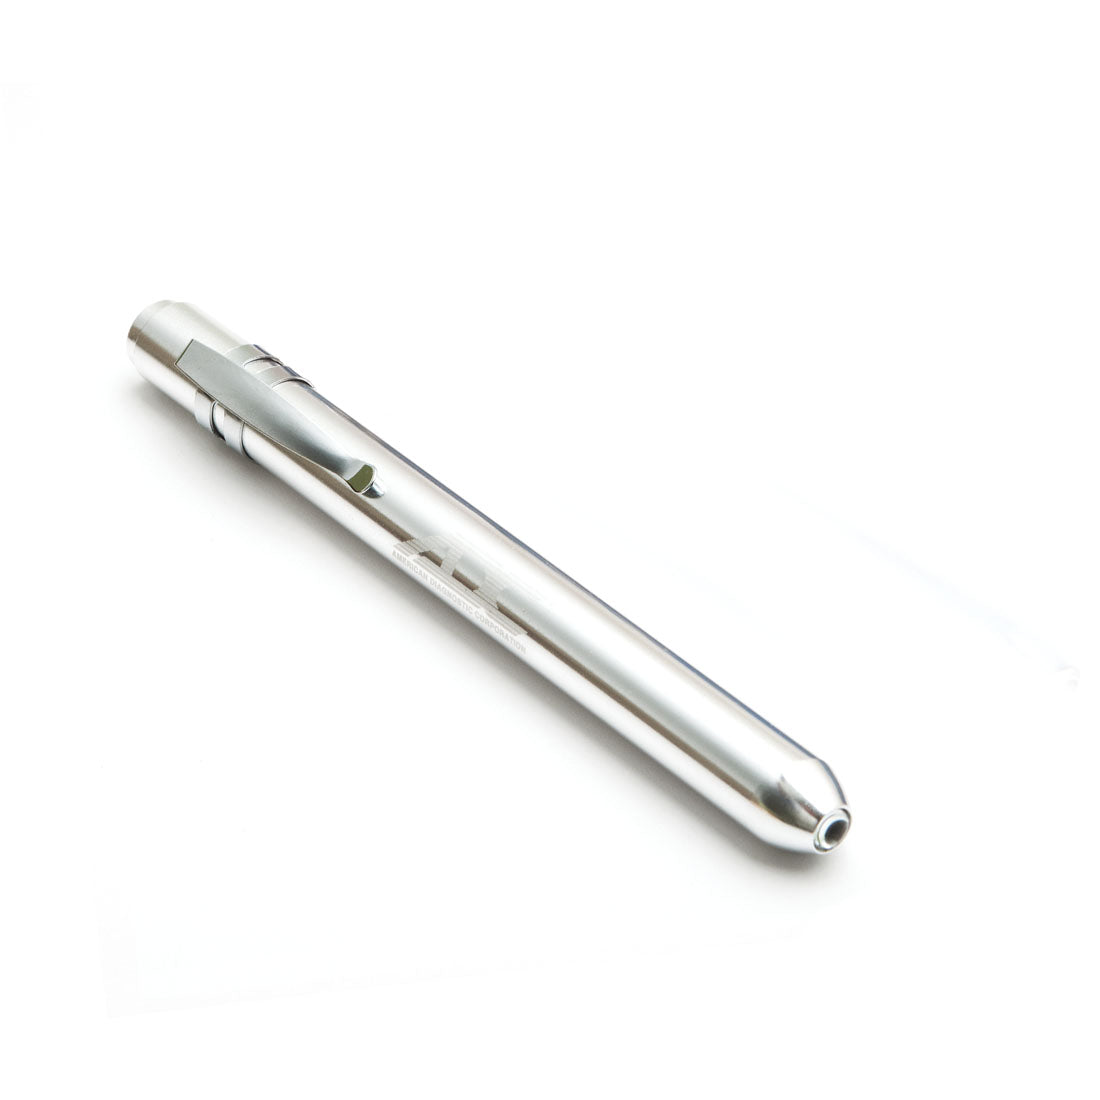 Adc Ad353q Metalite Ii Penlight - Silver, OS